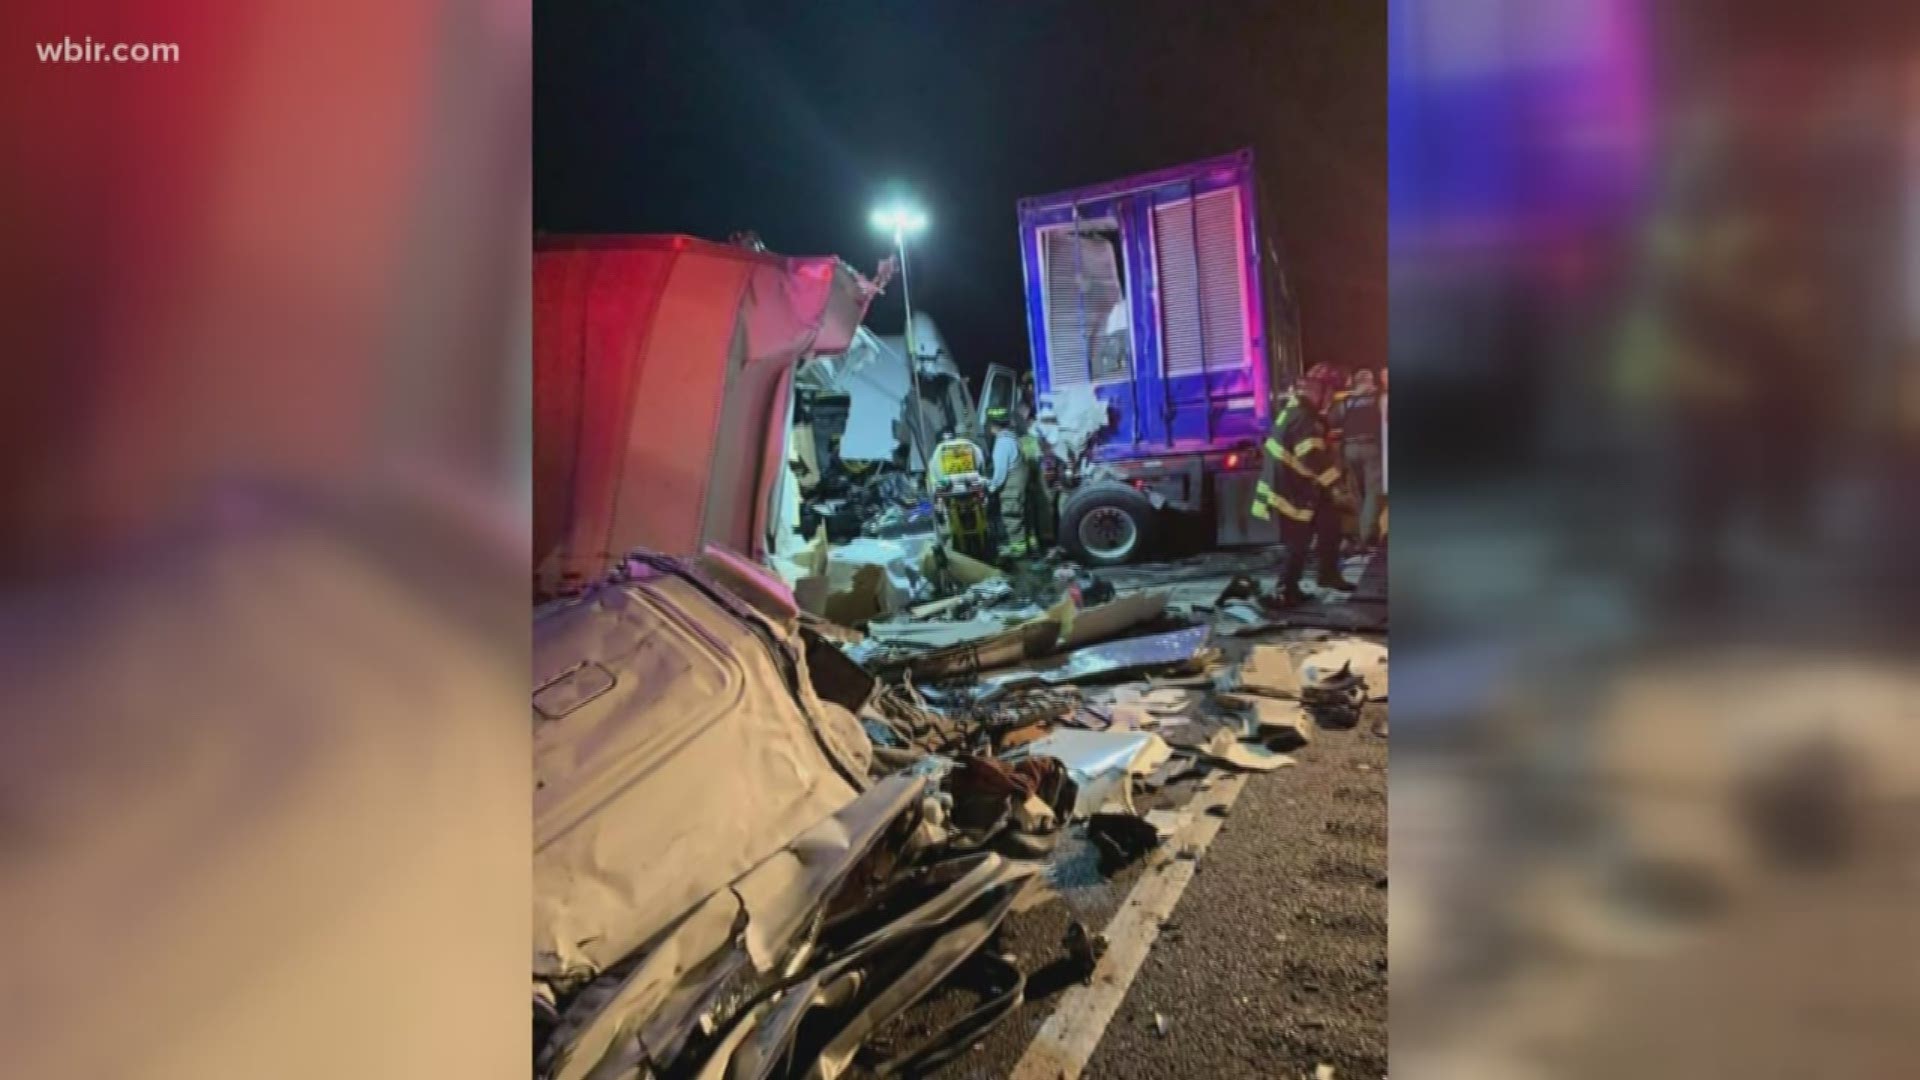 A crash involving multiple semi-trucks shut down I-75 South near Caryville Tuesday evening into the overnight hours. The road has since reopened.